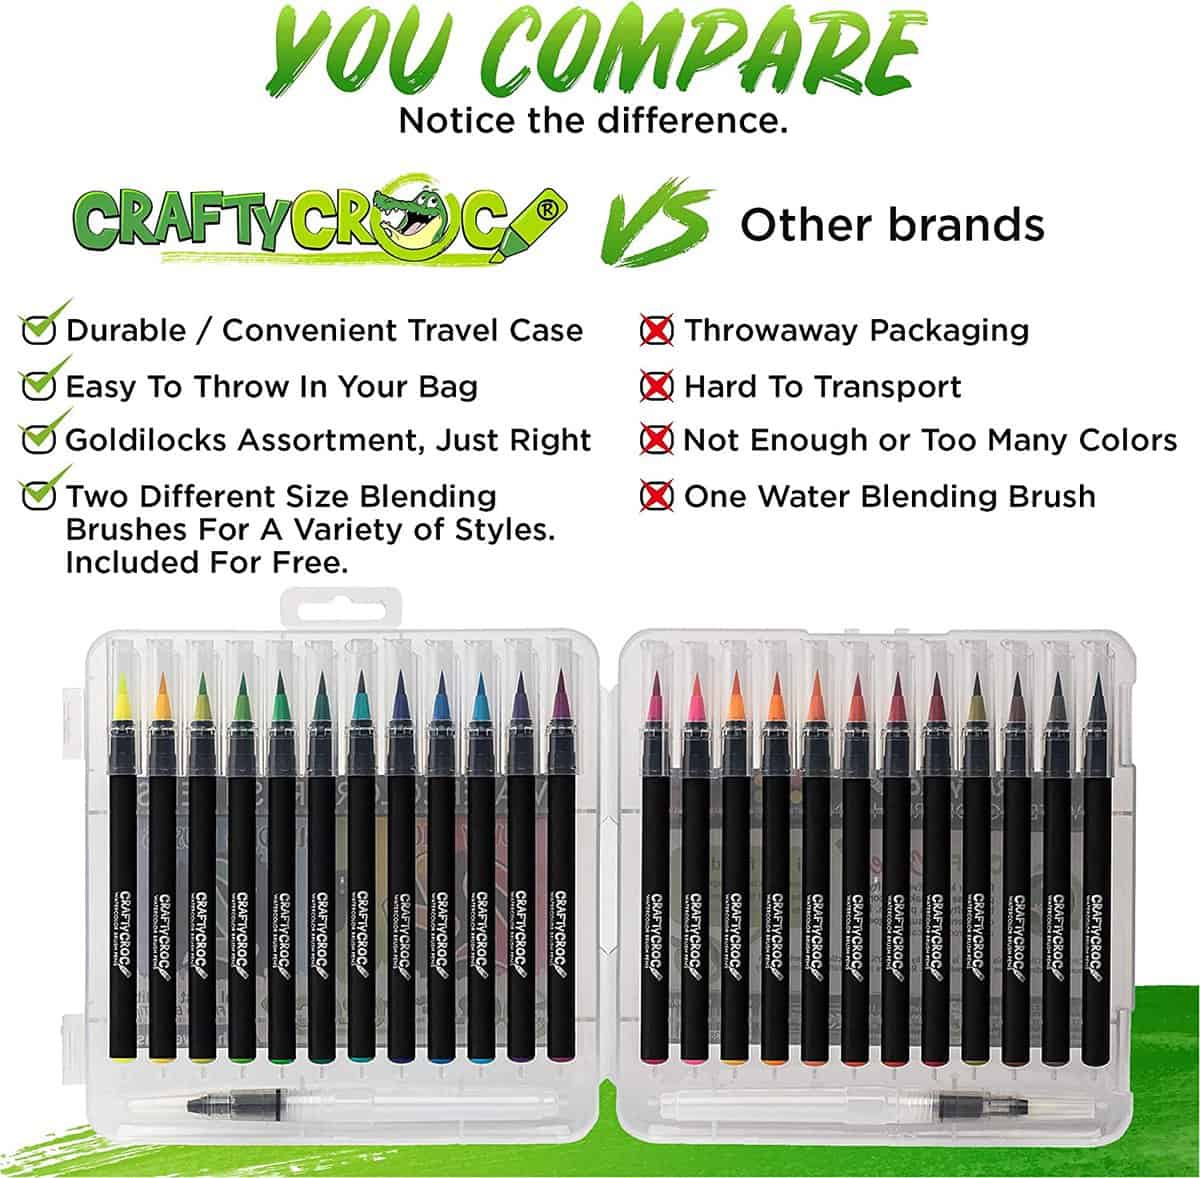 Watercolor Brush Pens 24 Refillable Colors with Travel Case